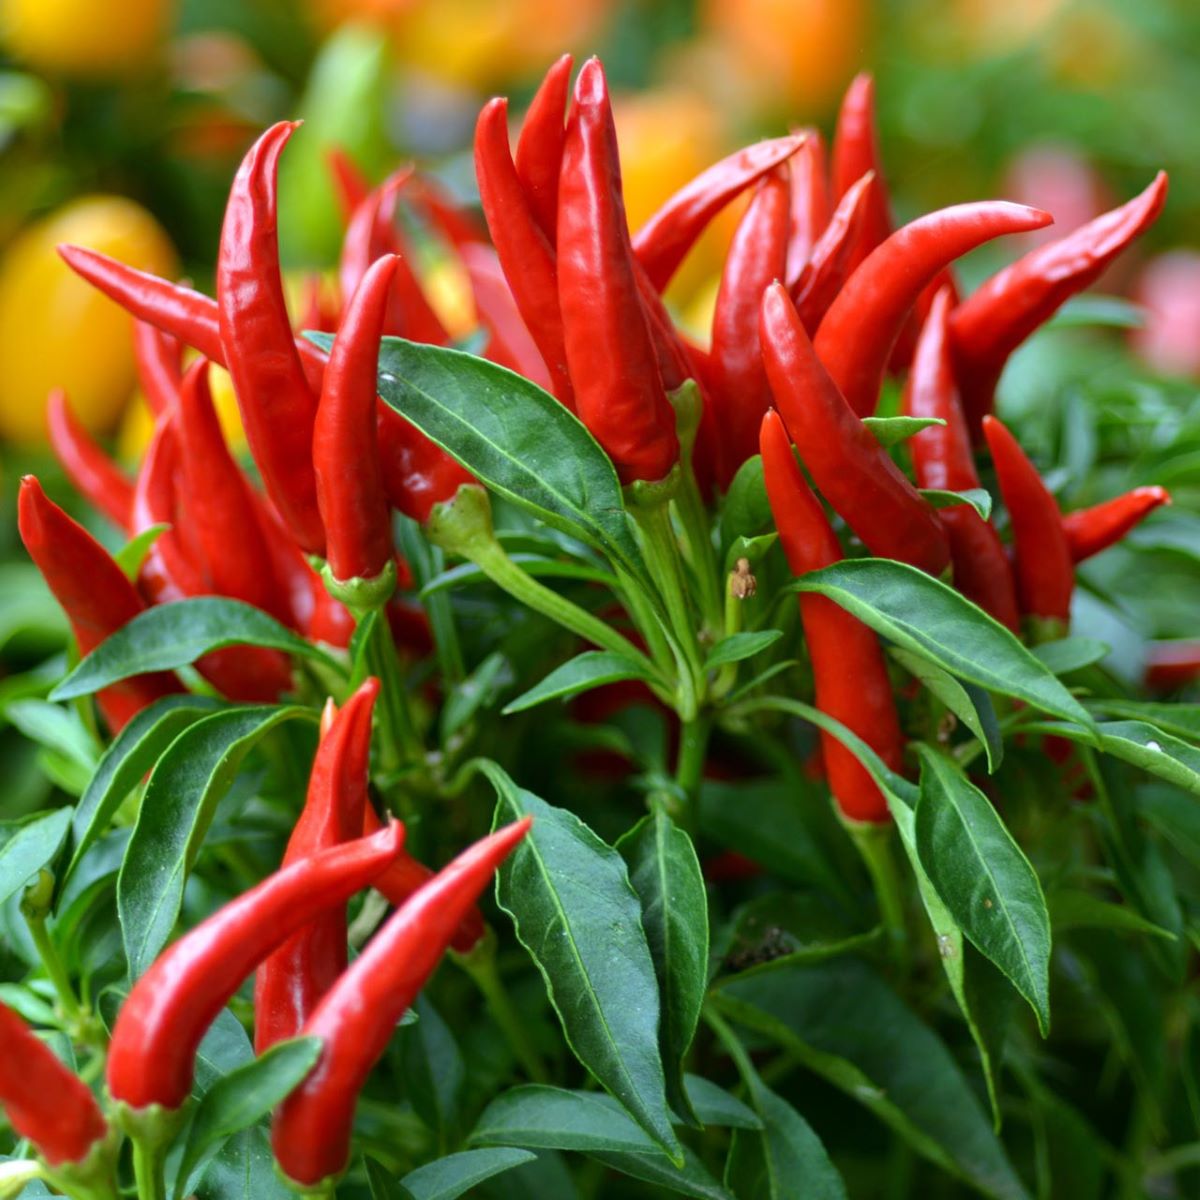 How To Store Thai Chili Peppers